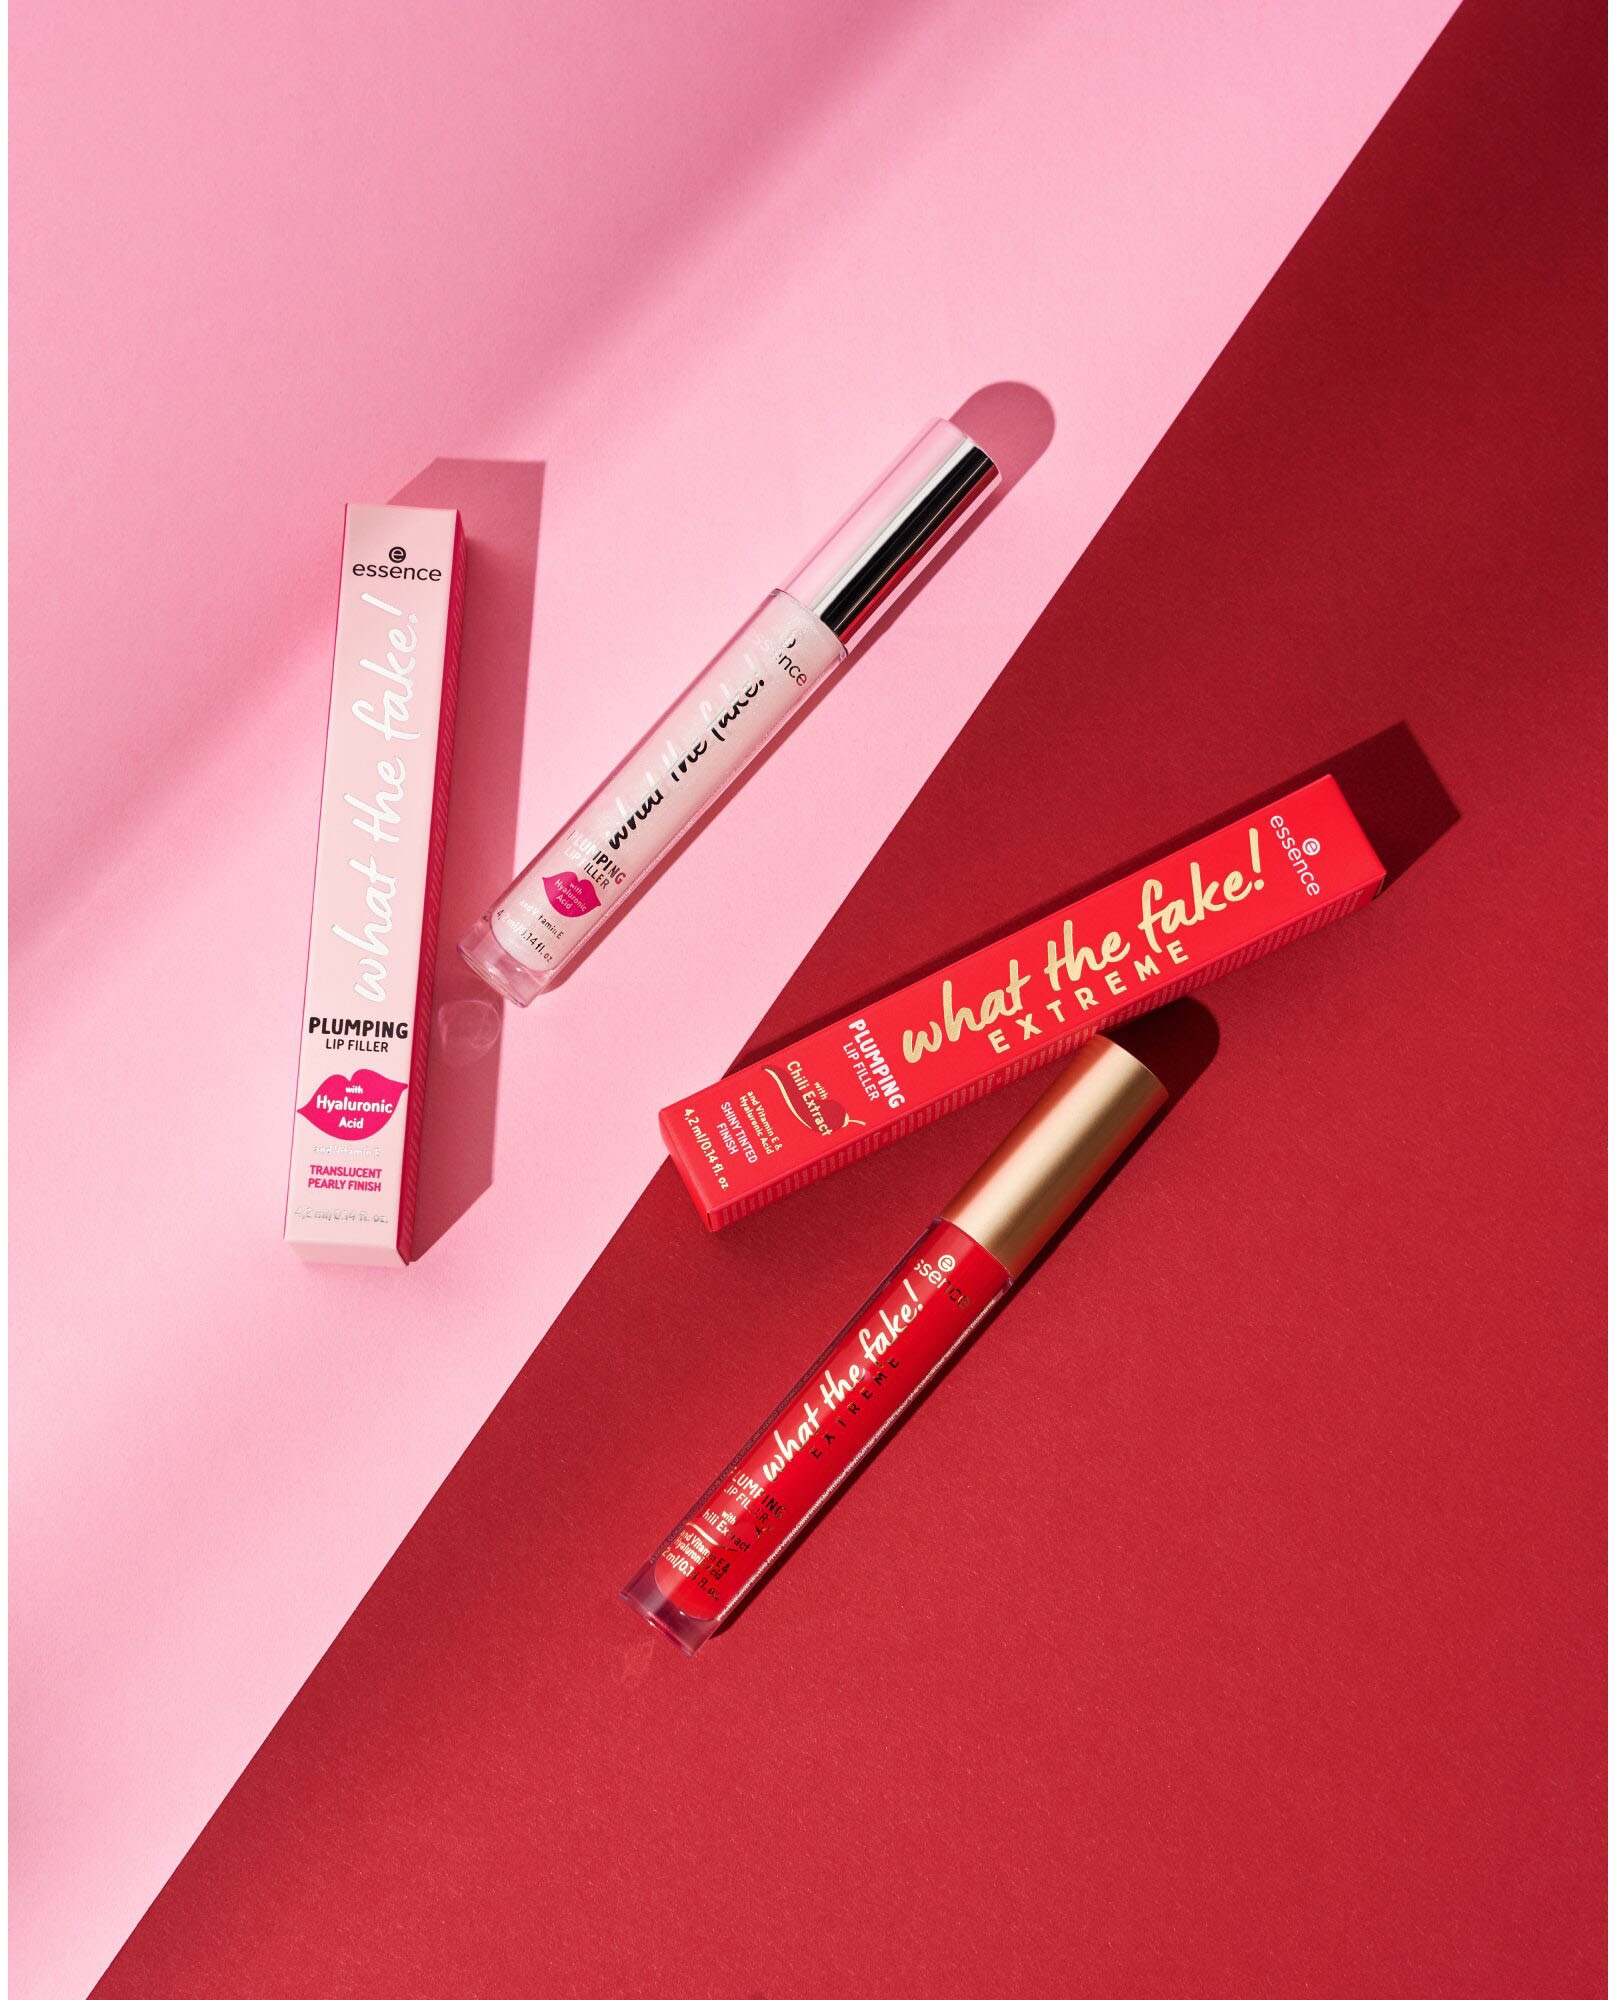 PLUMPING (Set, fake! Lip-Booster the EXTREME LIP »what FILLER«, bei ♕ Essence 3 tlg.)